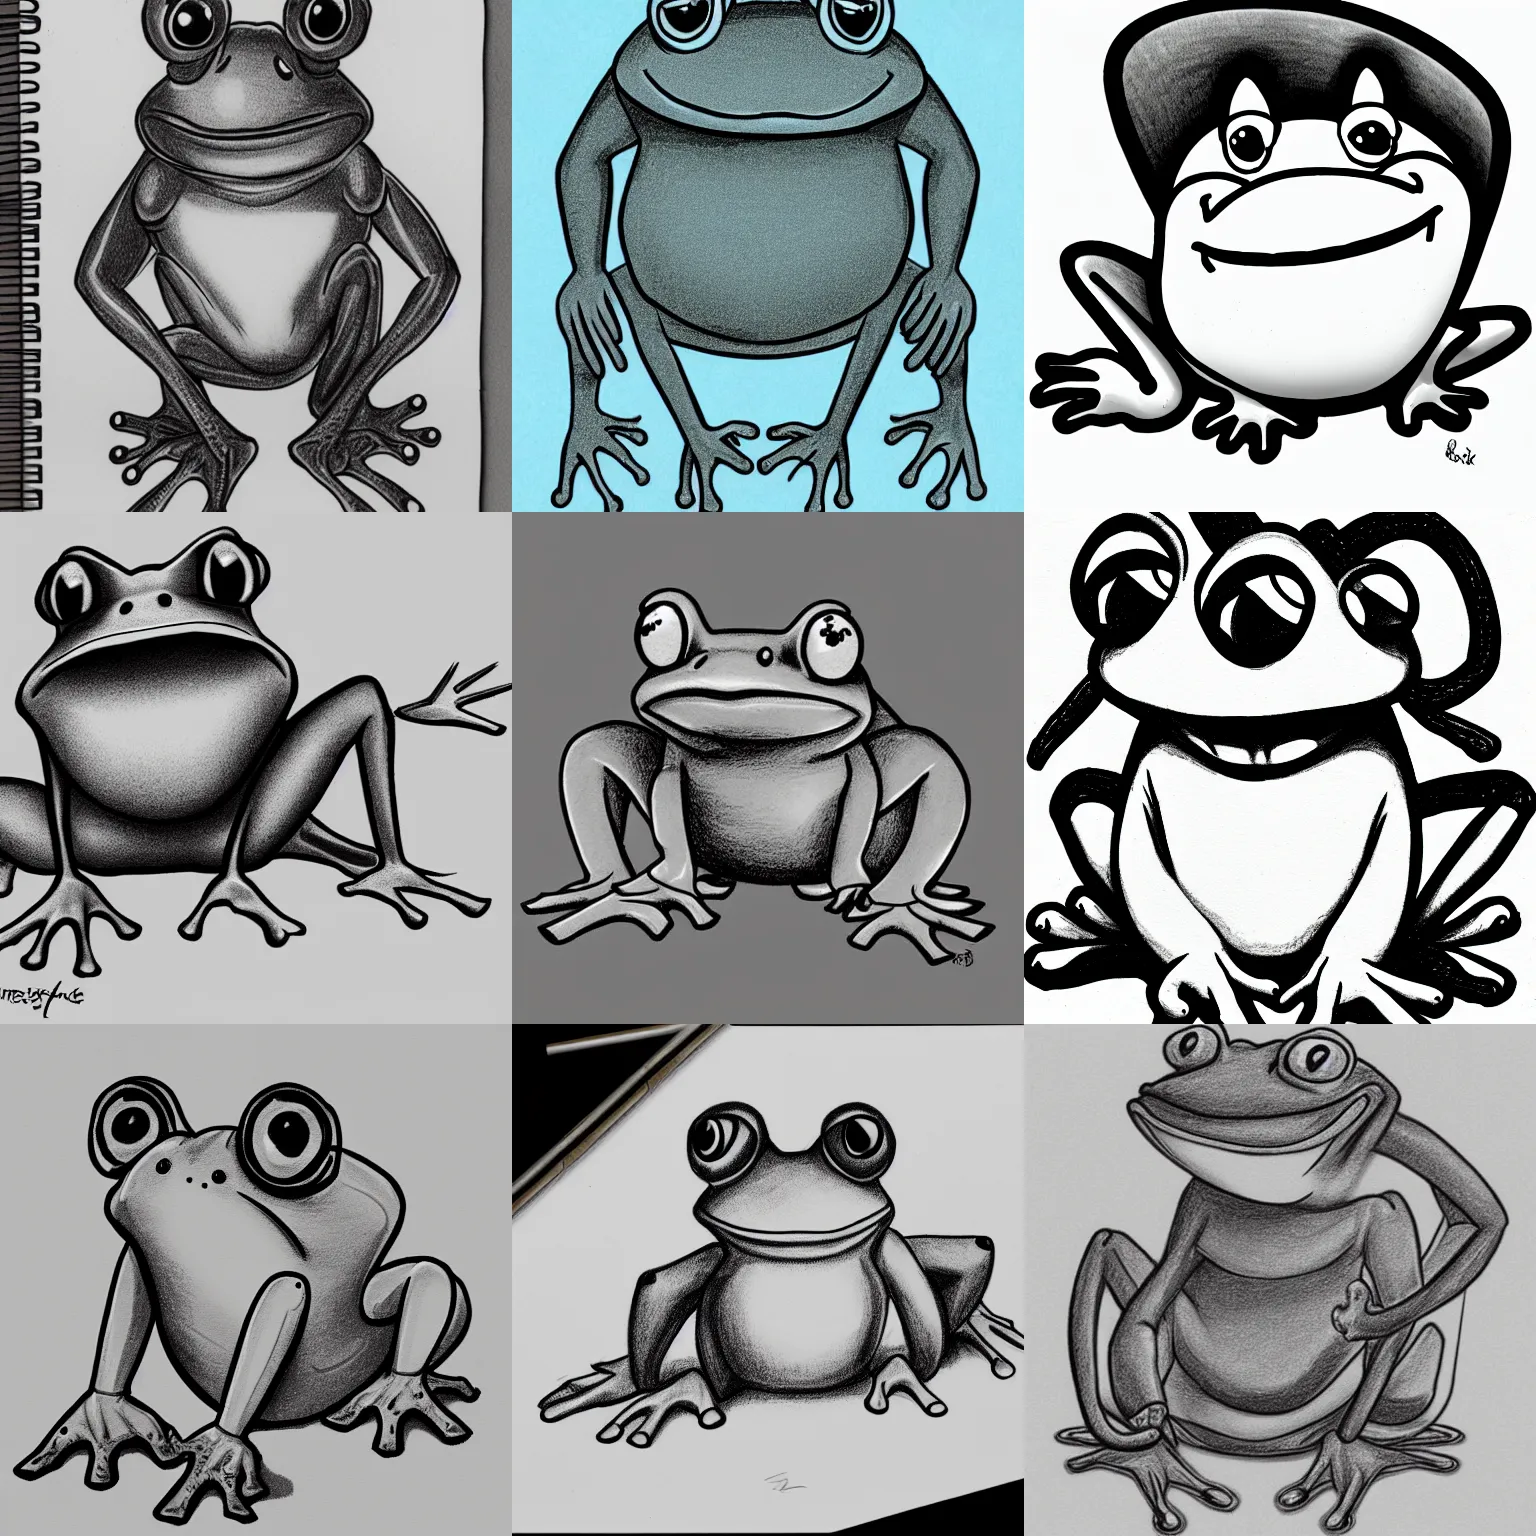 Prompt: A Rubber Hose style anthropomorphic frog, cartoon, pencil sketch